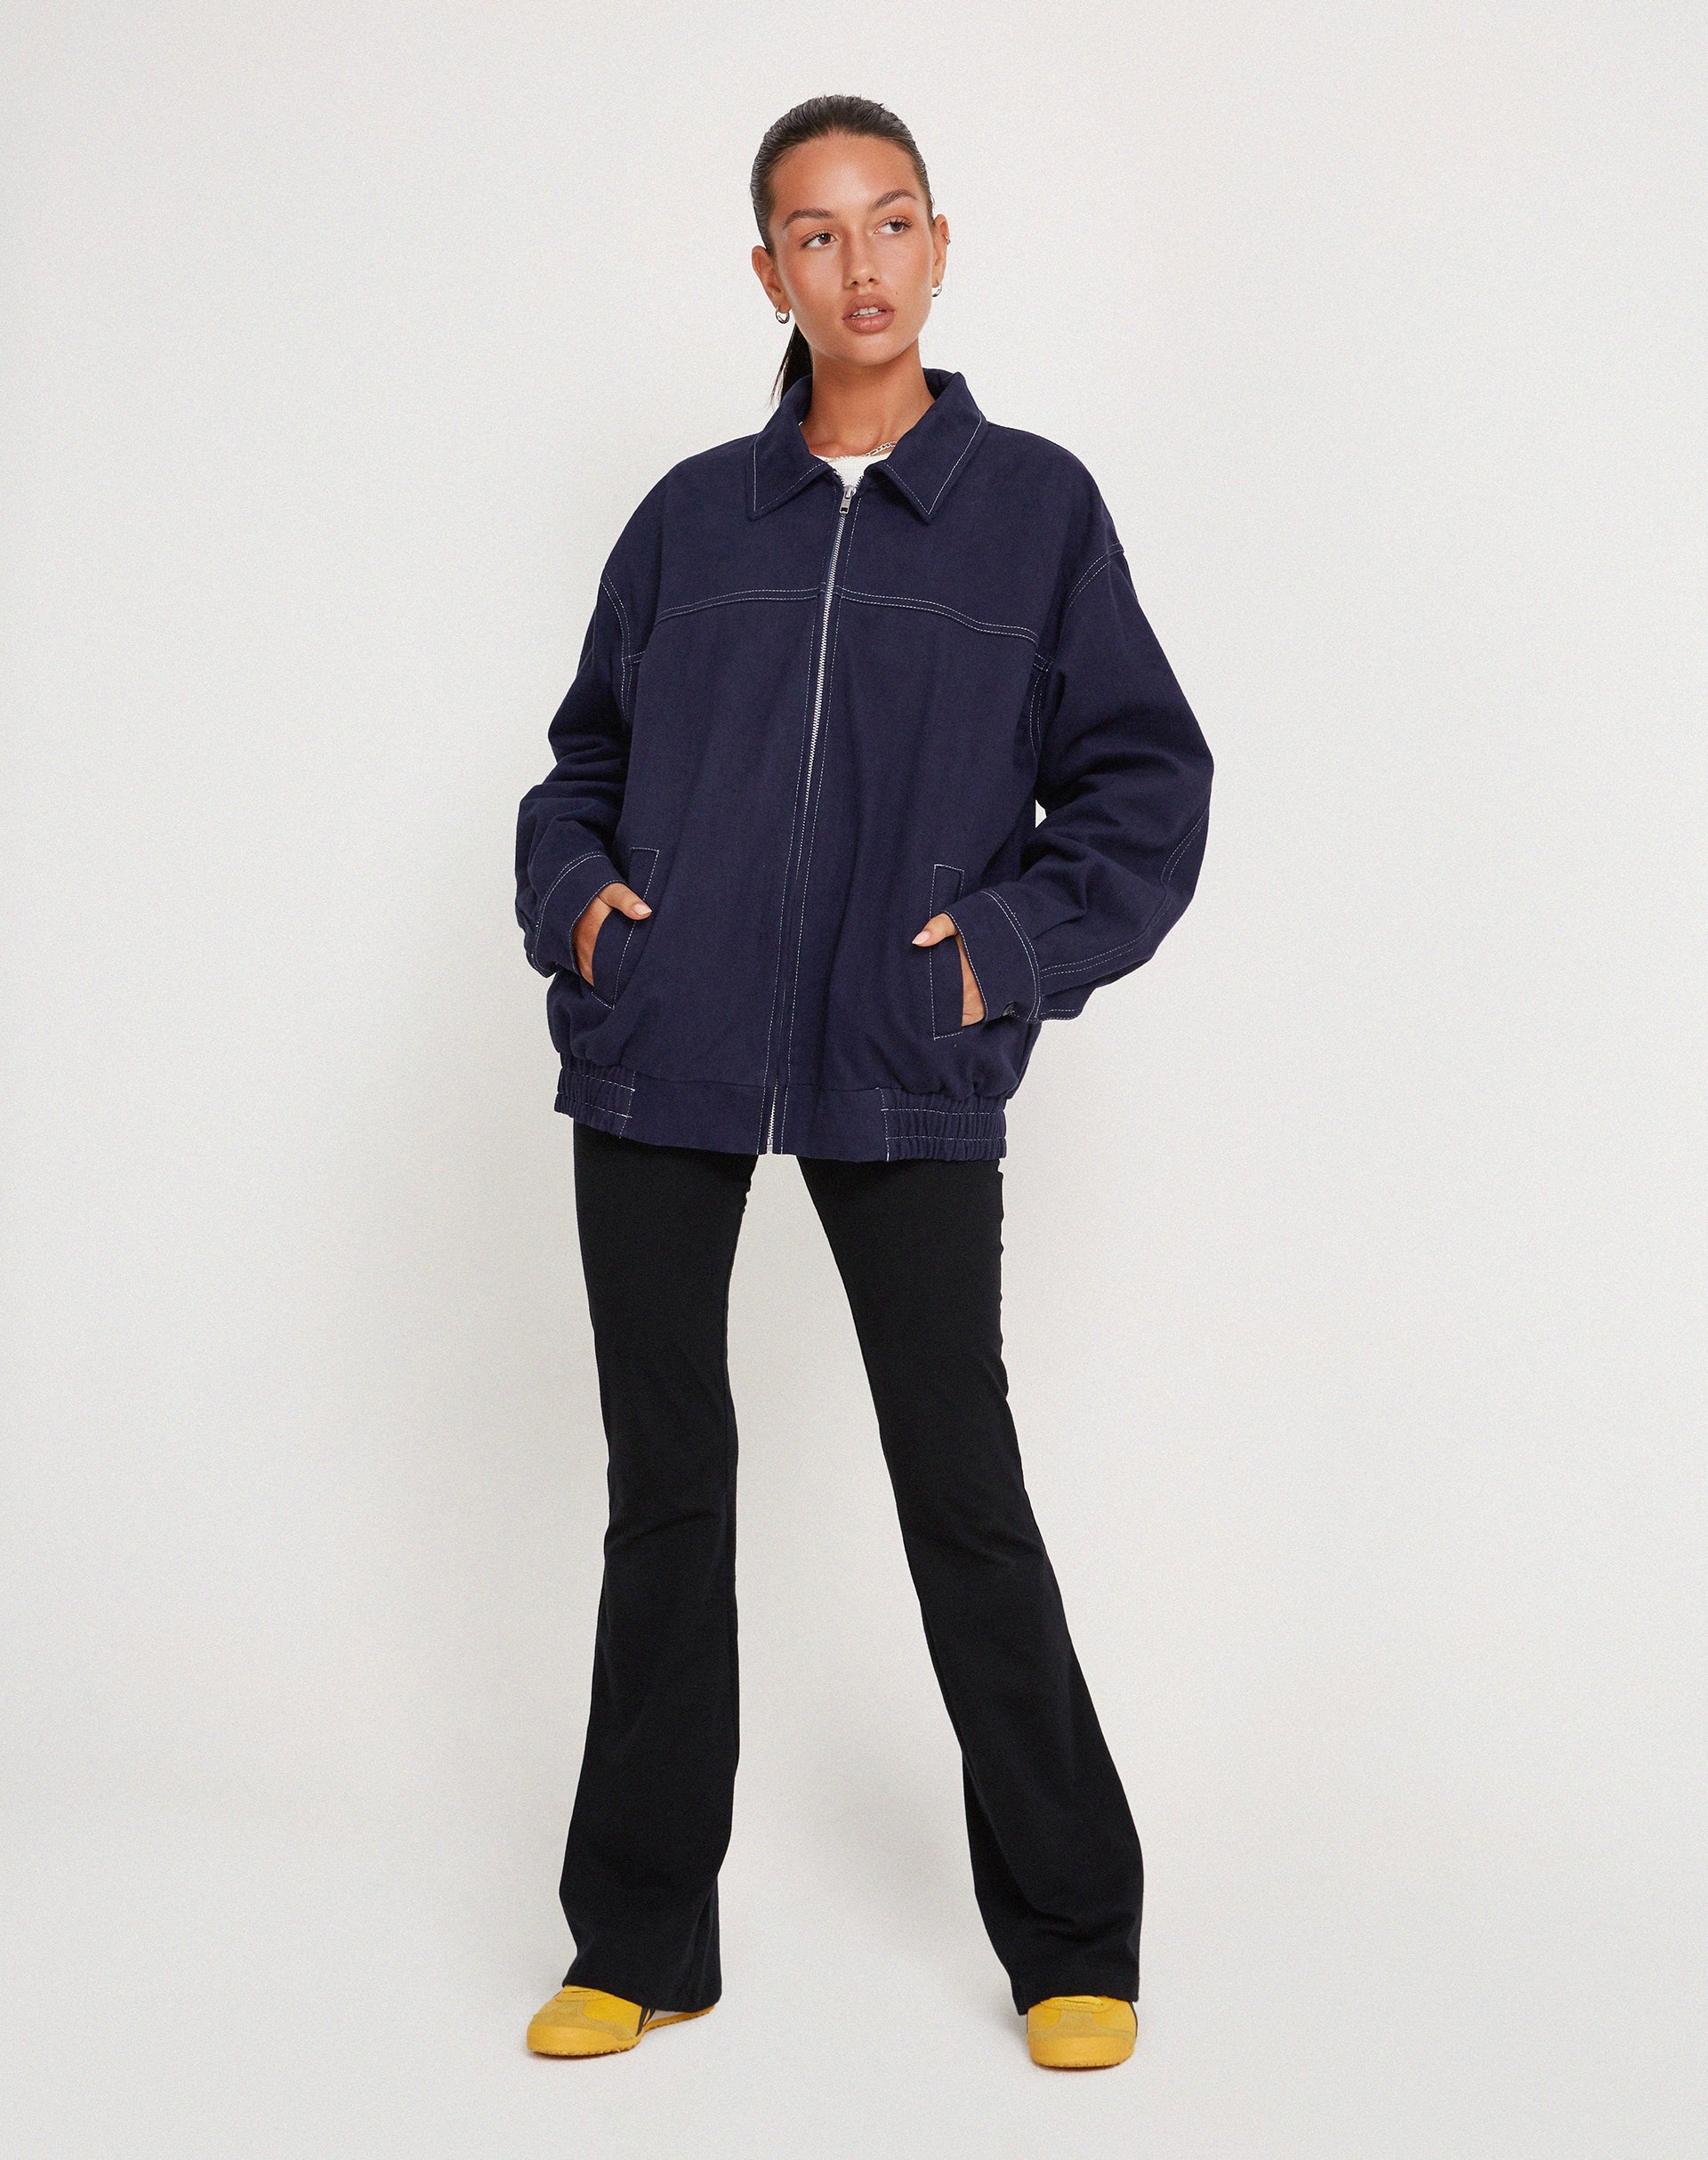 image of Cavitana Jacket in Deep Blue with White Stitch